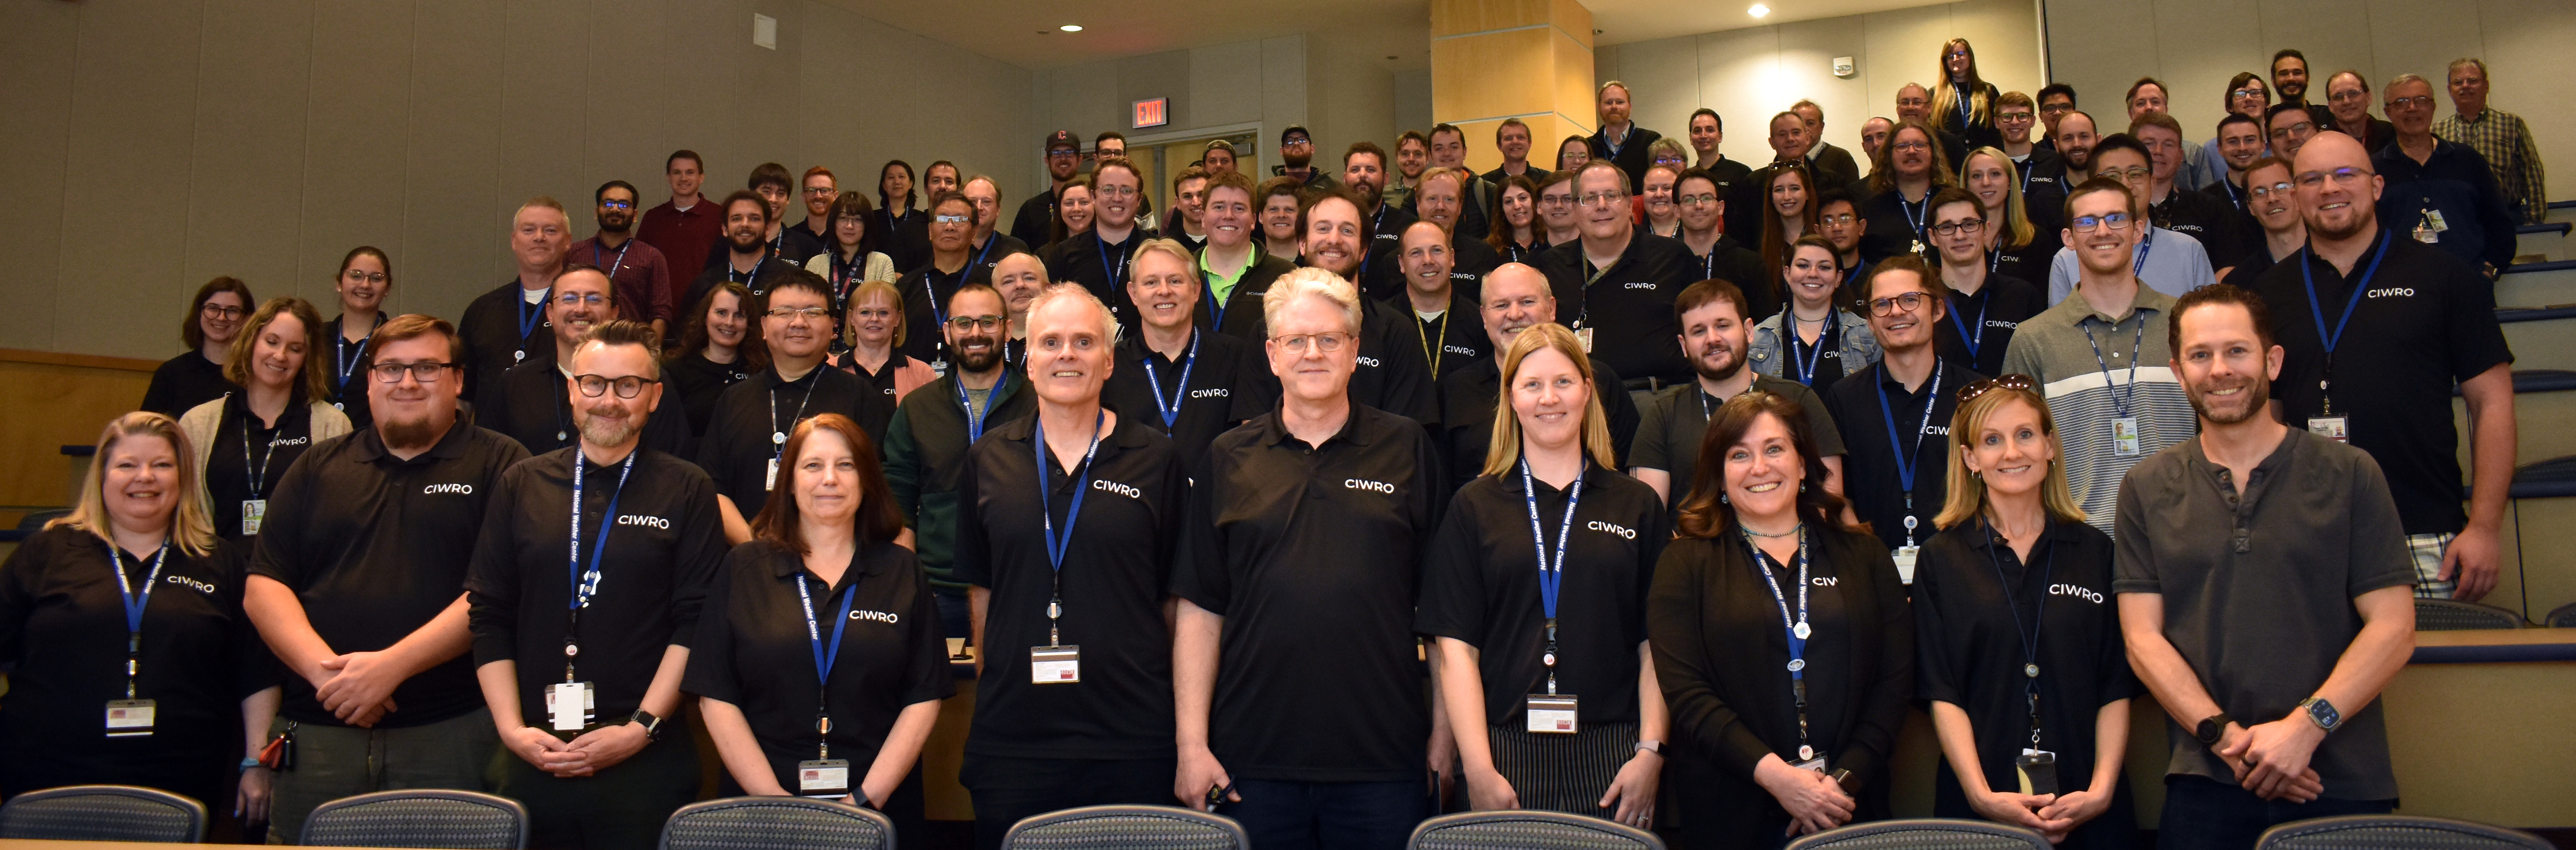 A group photo of all CIWRO staff taken in 2023 during an All-Hands Meeting.